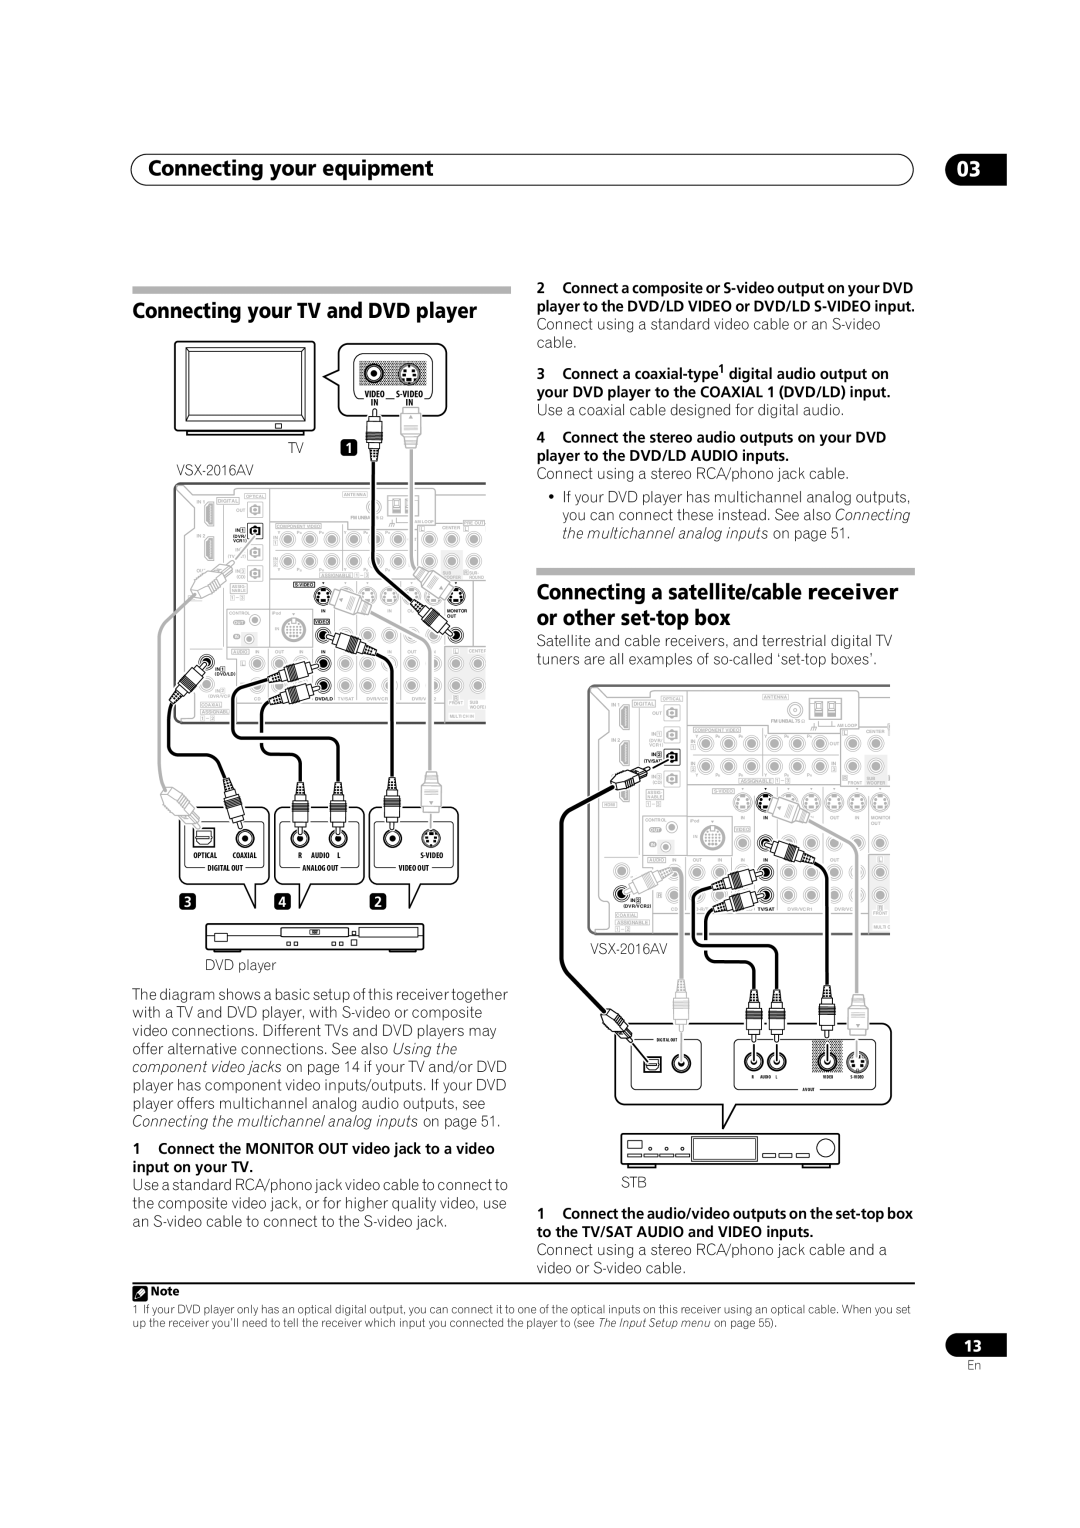 Pioneer VSX-2016AV operating instructions Connecting your equipment Connecting your TV and DVD player, 342 